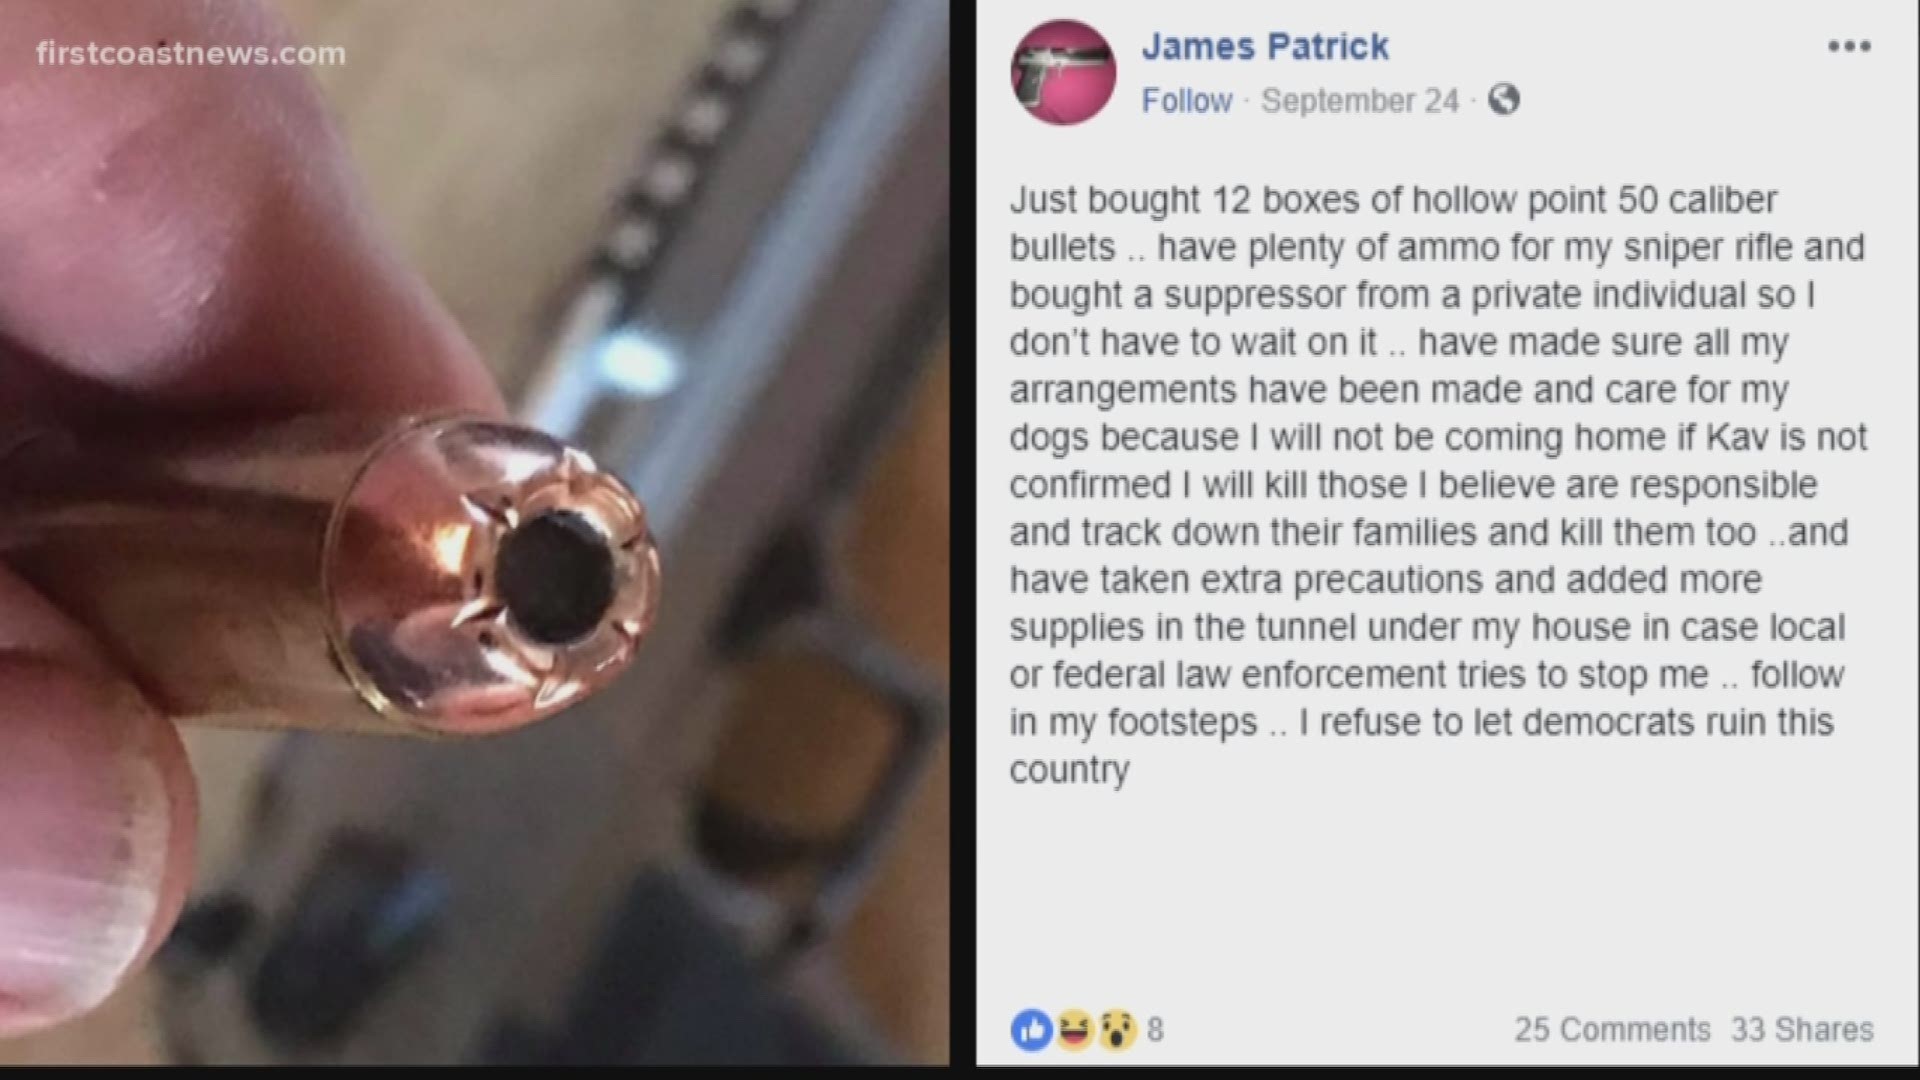 Police say James Patrick posted a message on Facebook threatening to kill democrats and "weak Republicans" and shoot any police officer that tried to stop him.